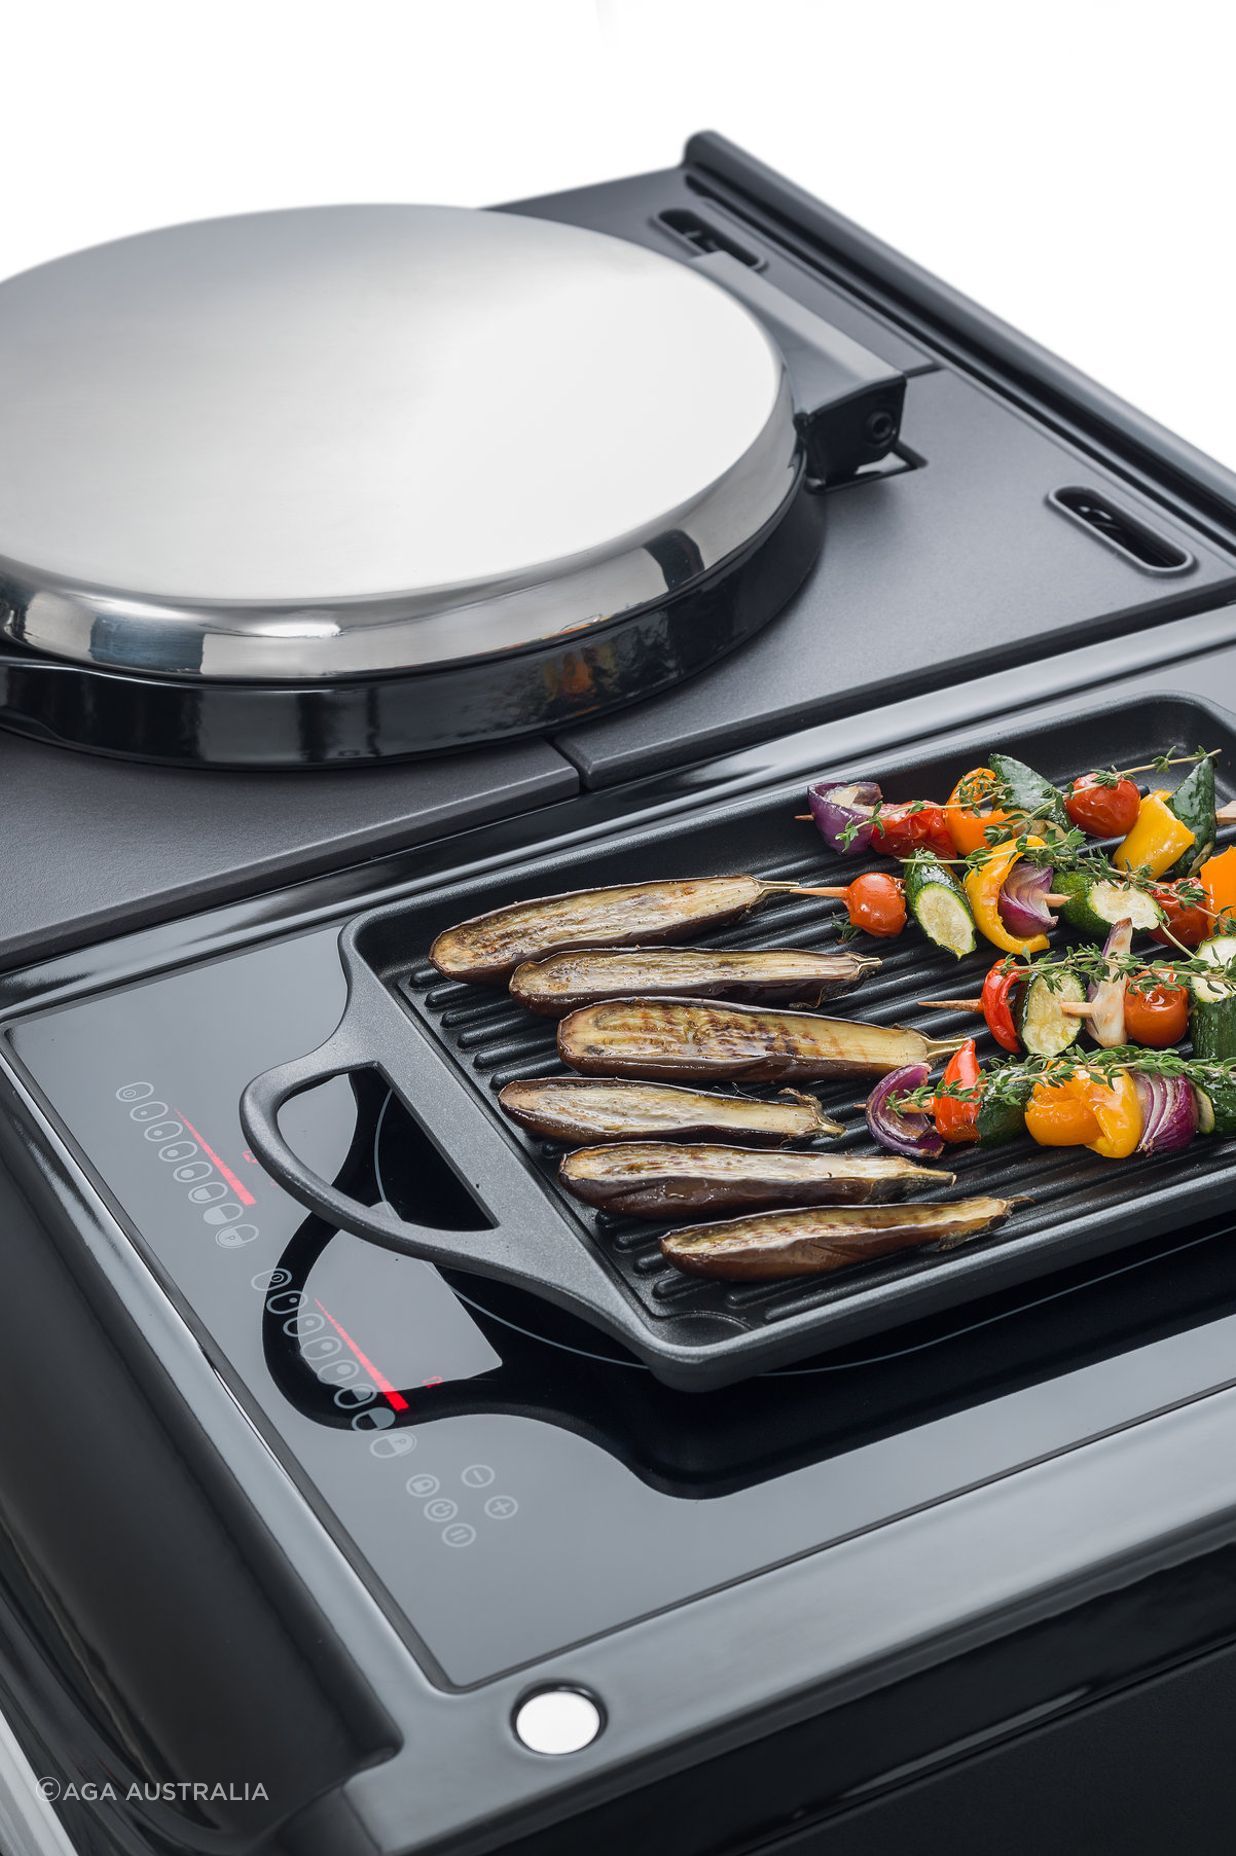 Cast iron ensures consistent cooking results and enhancing the flavours of dishes.